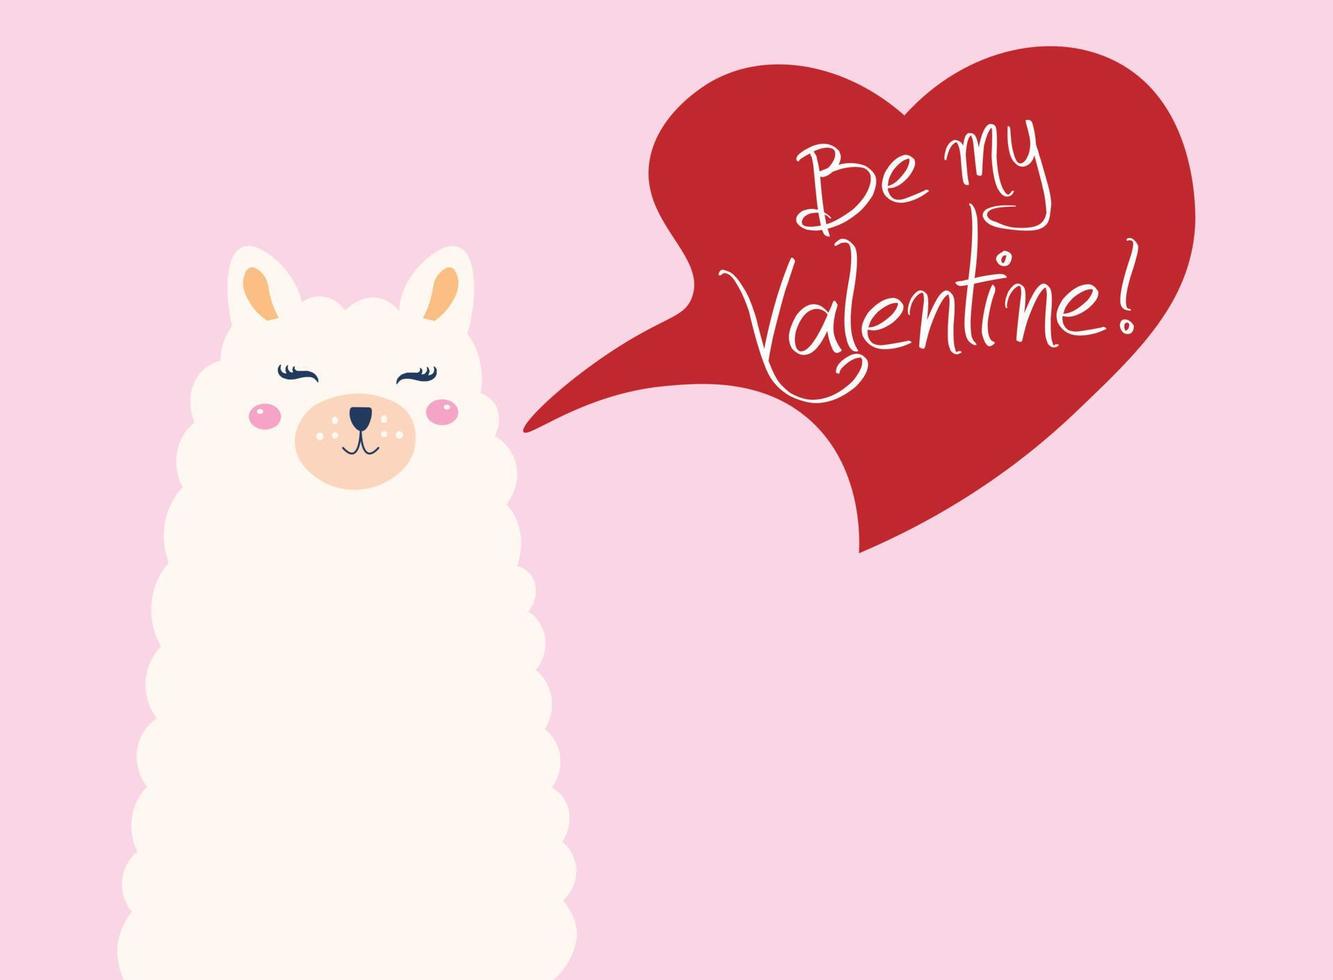 Be mine Valentine. Cute llama with speech bubble. Alpaca character design for cards, prints, textile, Valentine's day, baby shower or nursery vector